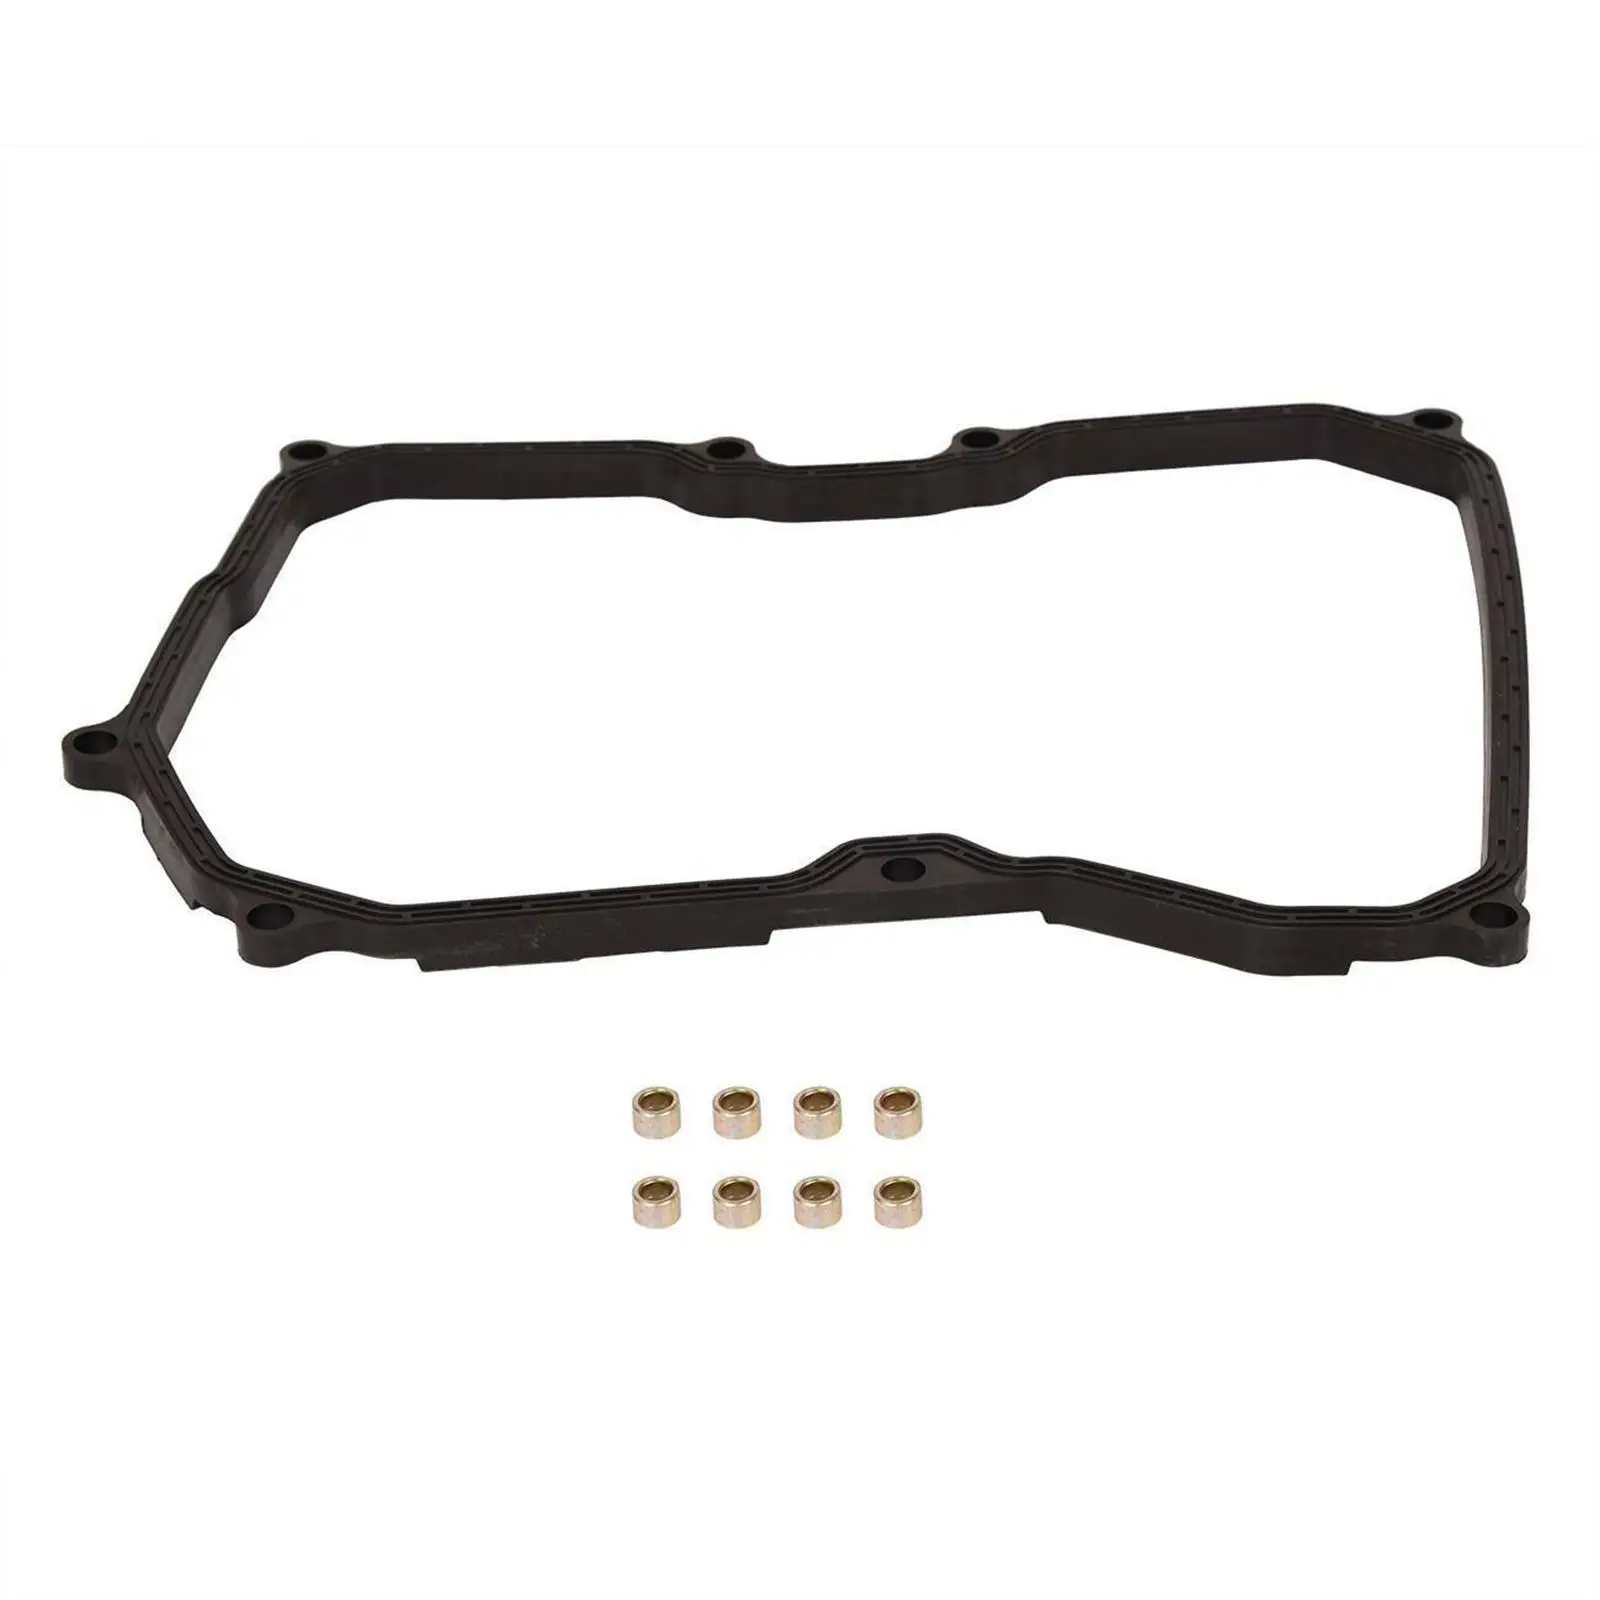 Transmission Oil Pan Gasket Lightweight for Mini 2007+ Replace Parts